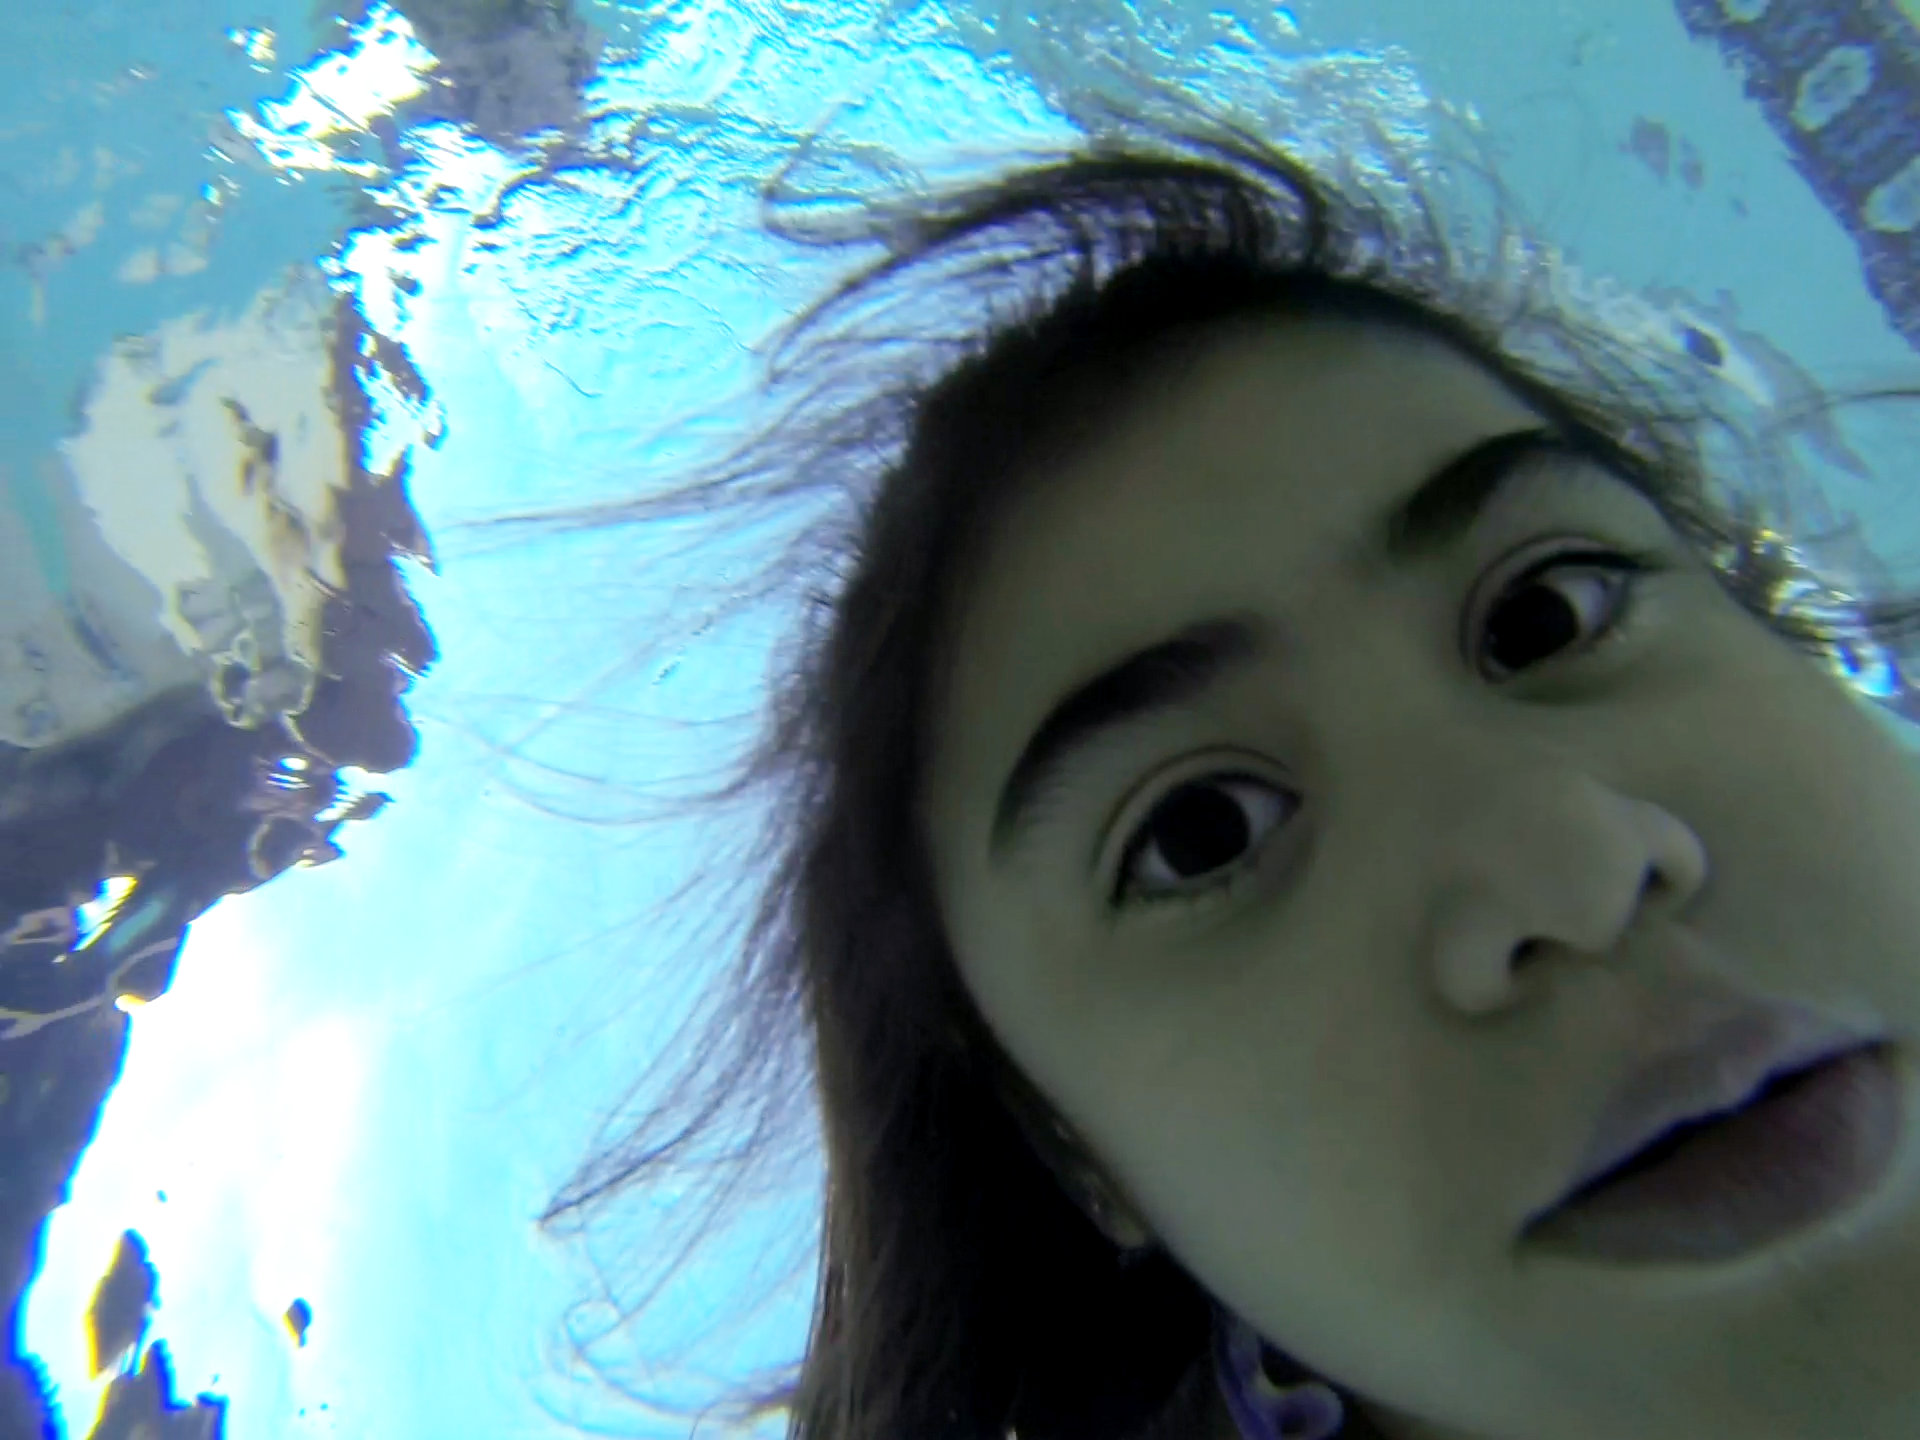 Chanielle Islas underwater in my backyard swimming pool looking down at a GoPro Hero3 camera in her hand.